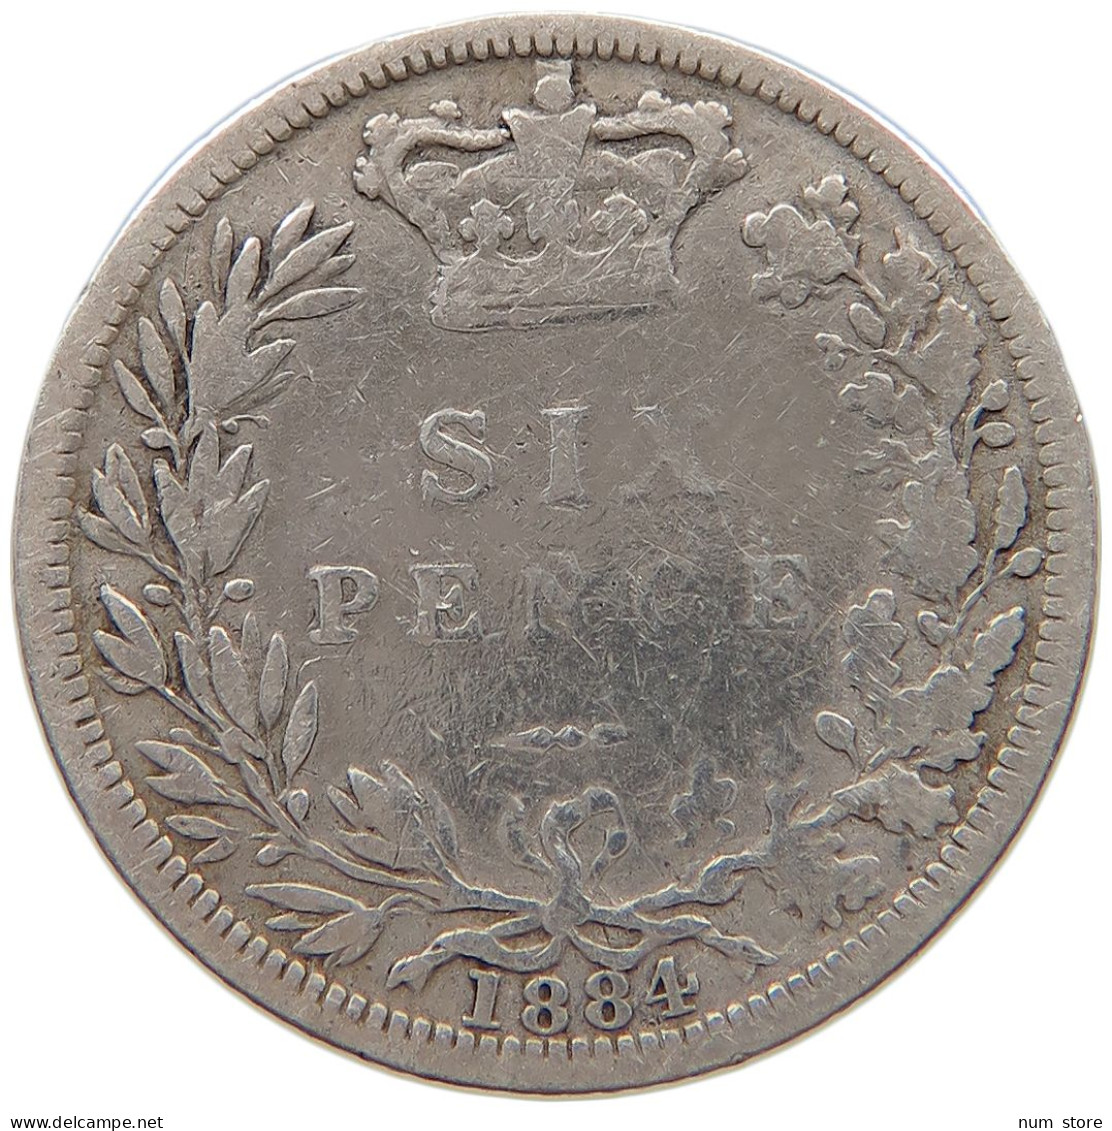 GREAT BRITAIN SIXPENCE 1884 #s096 0325 - H. 6 Pence